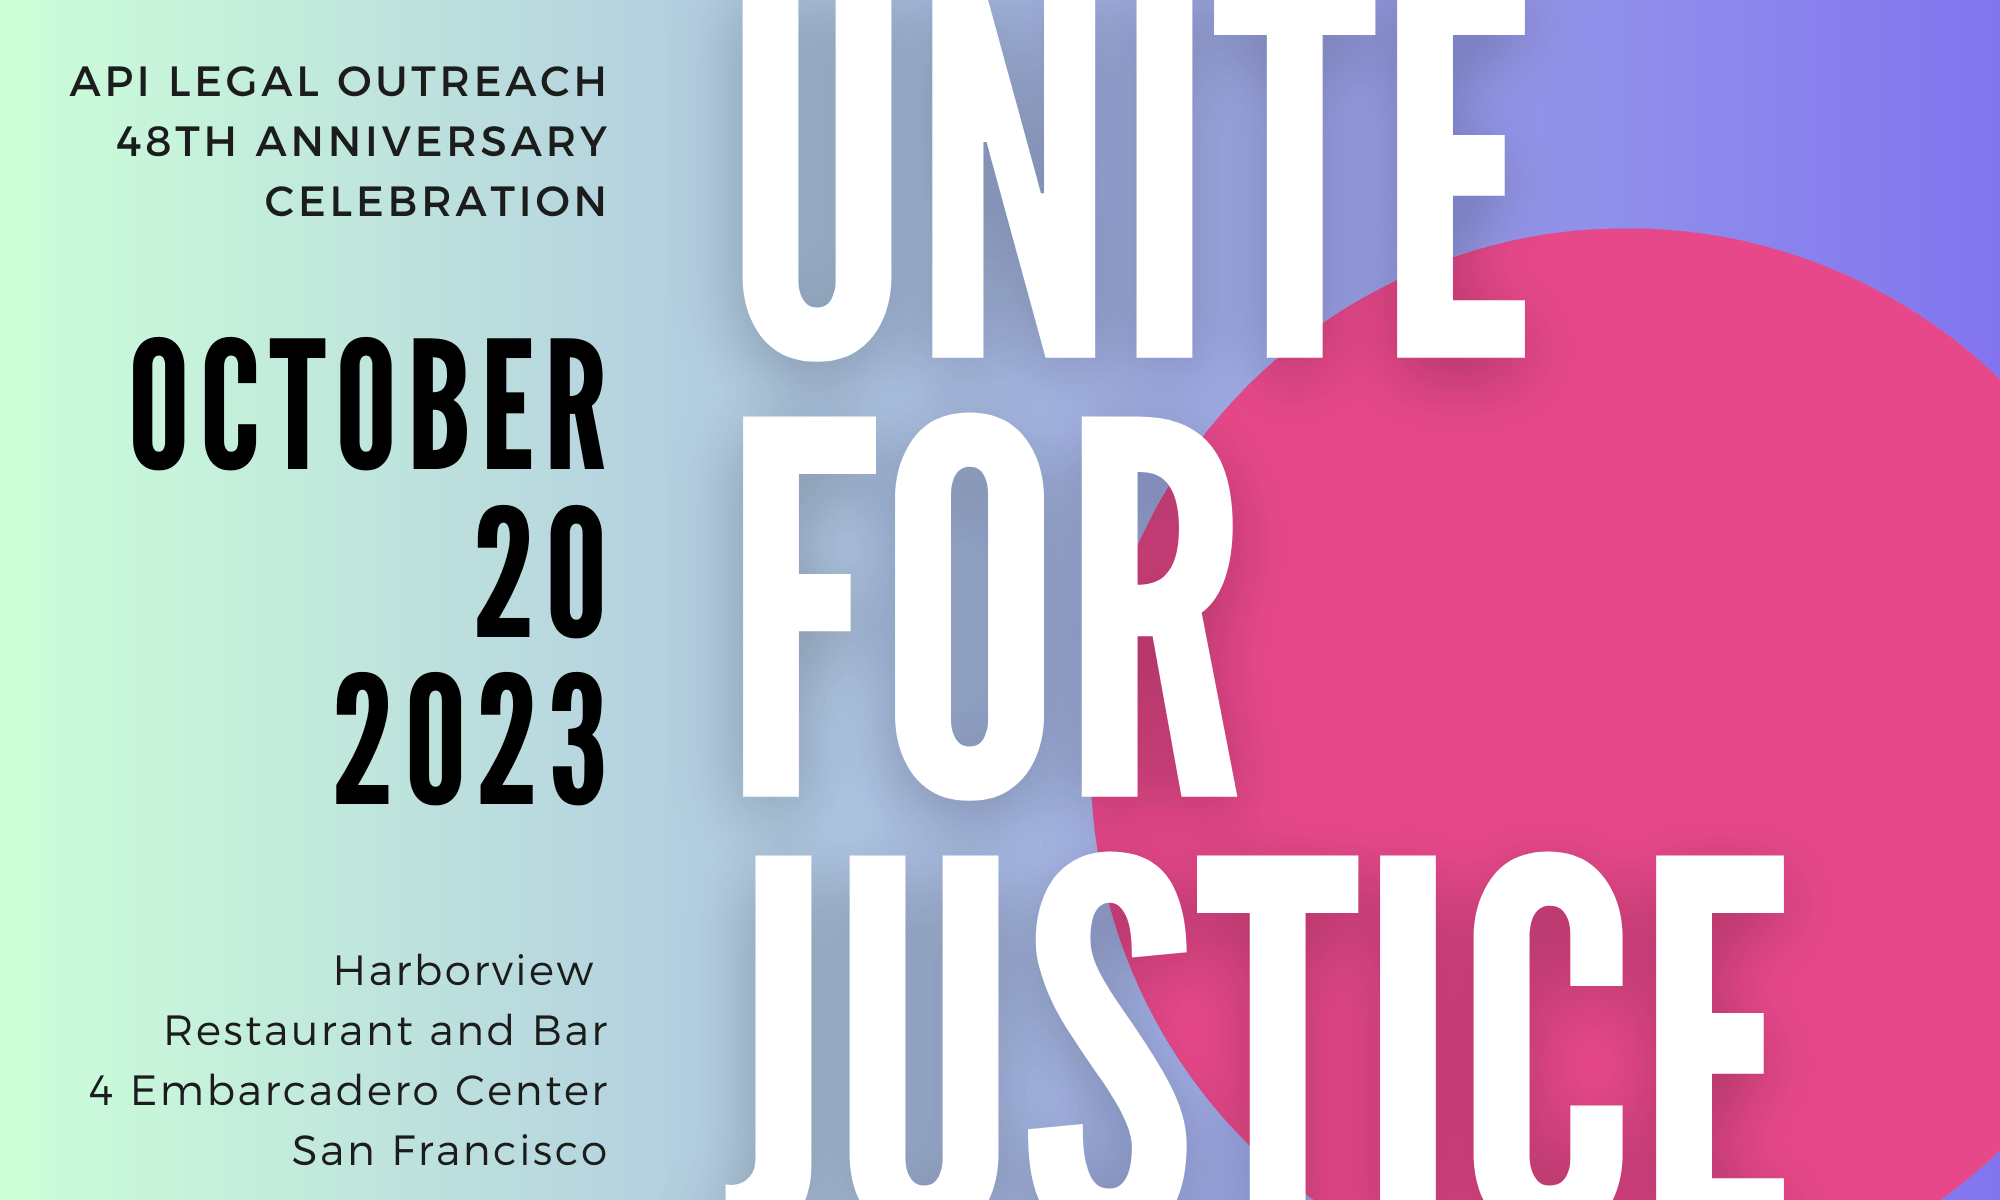 Unite for Justice Oct. 20, 2023 at Harborview Restaurant for APILO's 48th Celebration